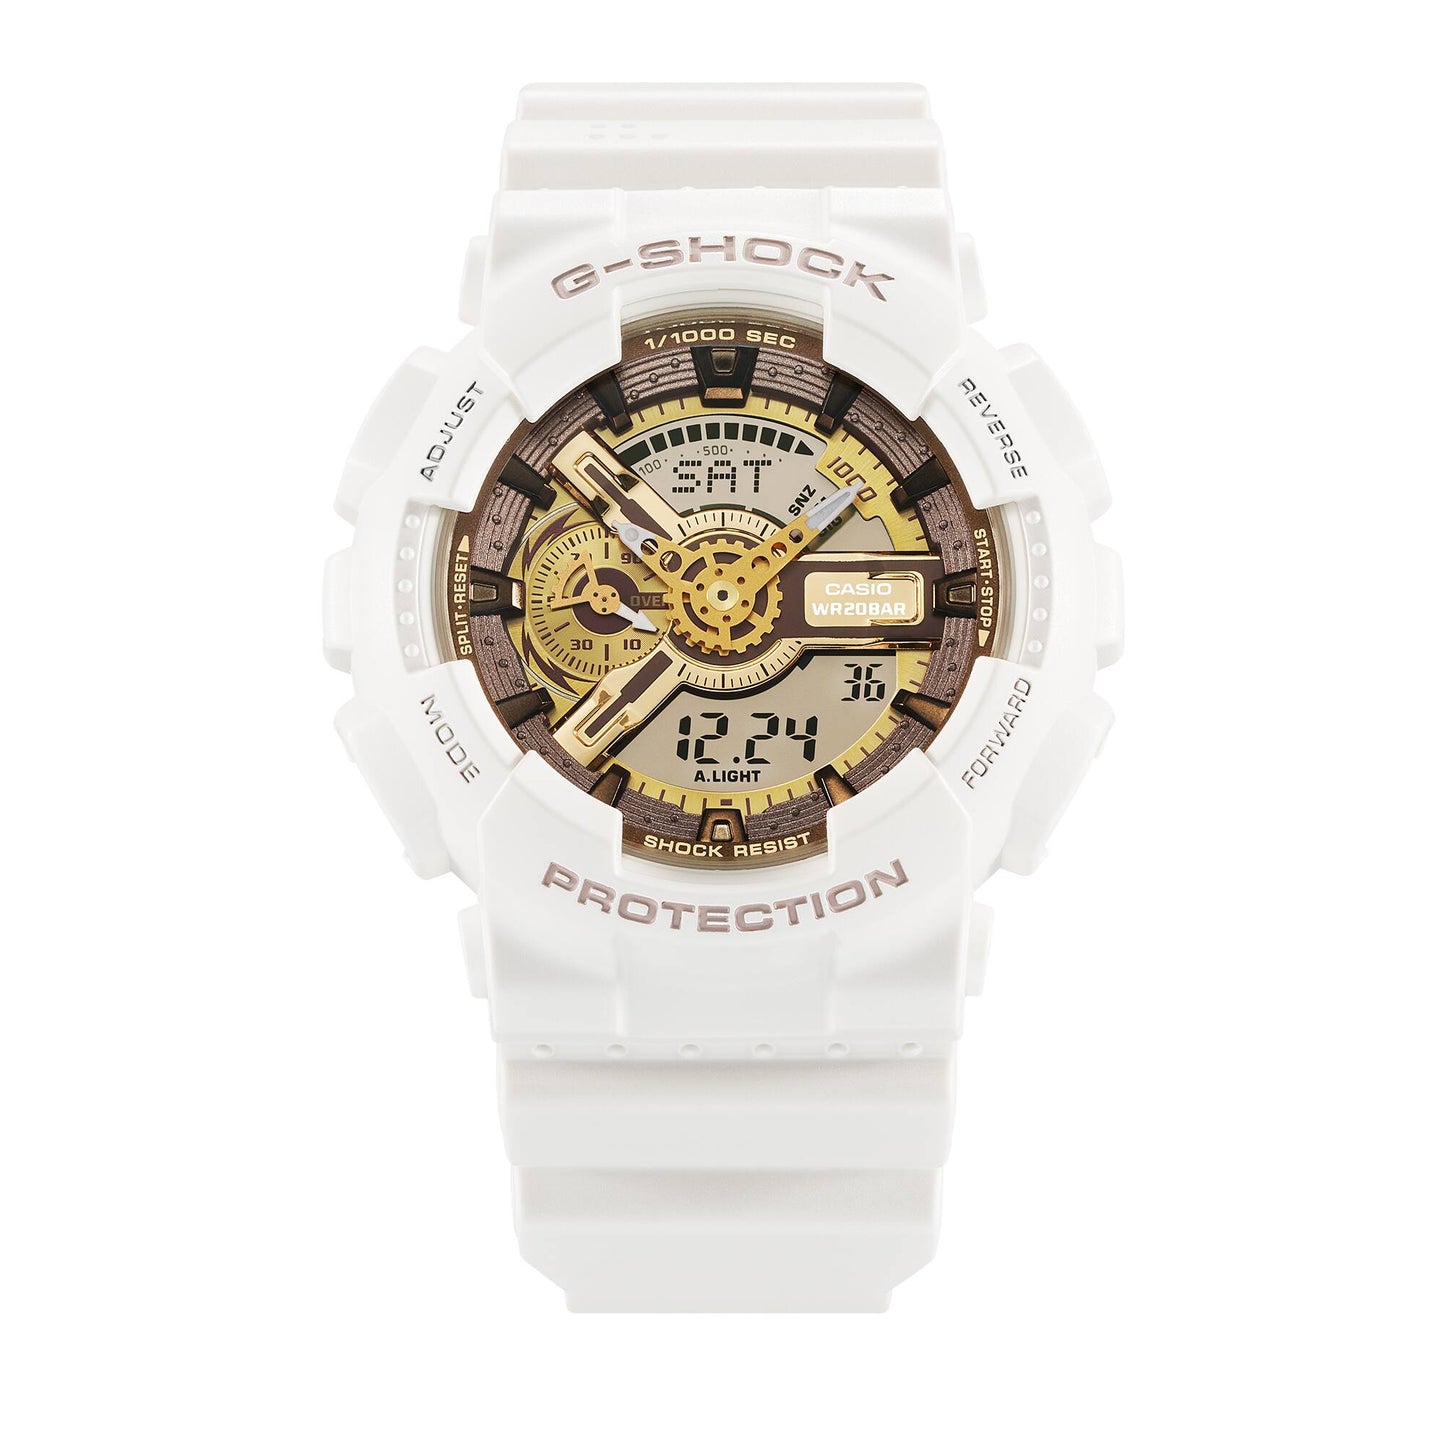 CASIO LOVER'S COLLECTION BABY-G / G-SHOCK LOV-22A-7A